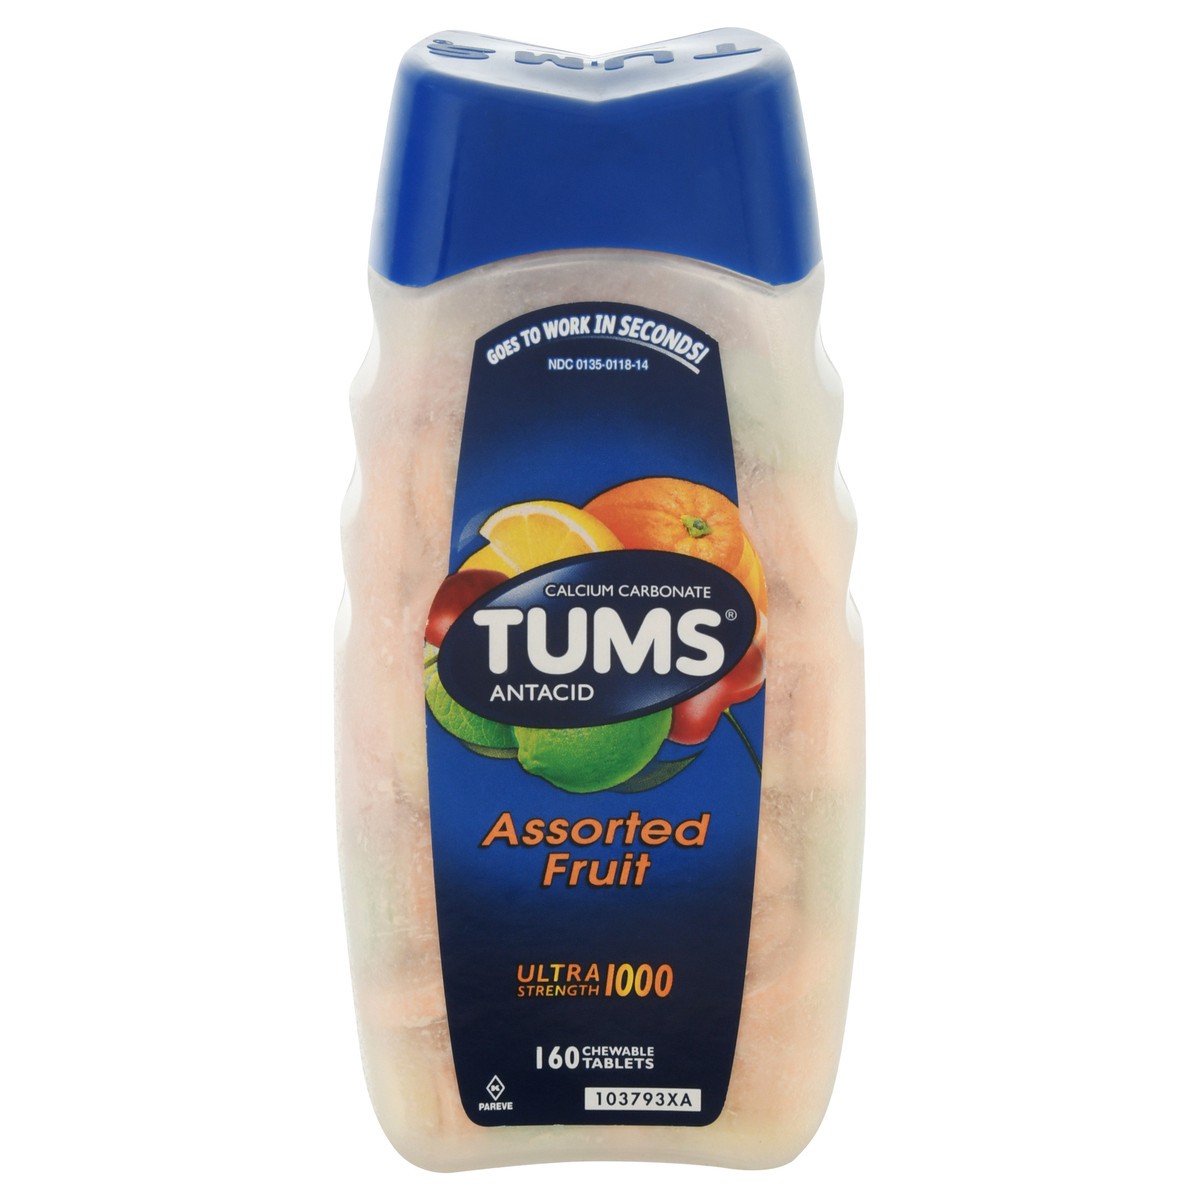 slide 1 of 94, Tums Ultra Strength Assorted Fruit Antacid Chewable Tablets - 160ct, 160 ct